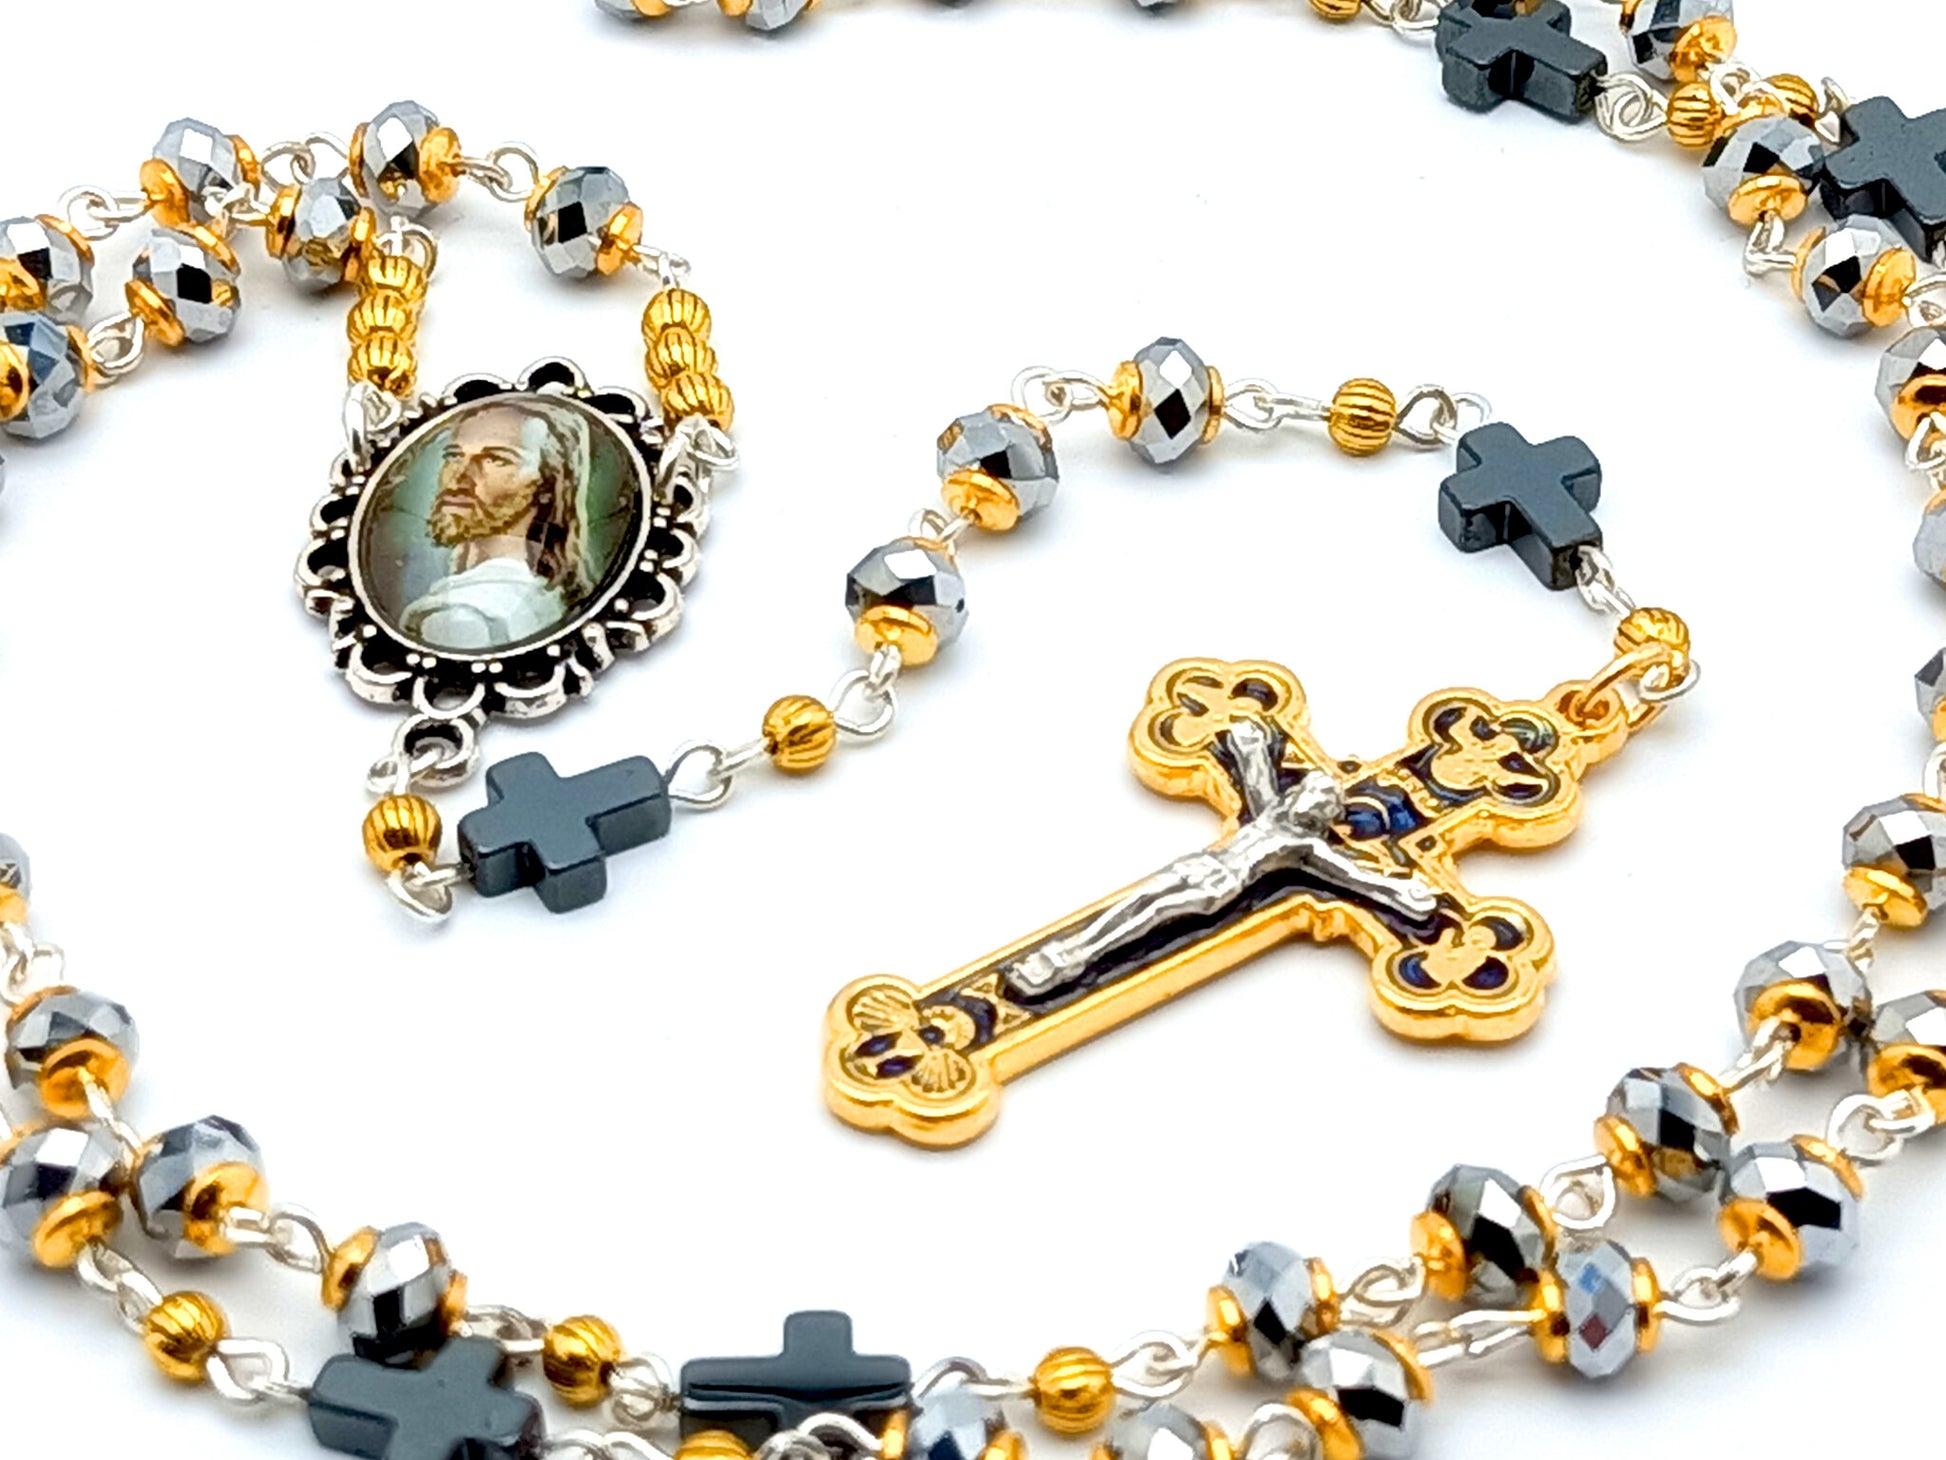 Holy Face of Jesus unique rosary beads with silver faceted glass and hematite beads, gold and silver crucifix and picture centre medal.